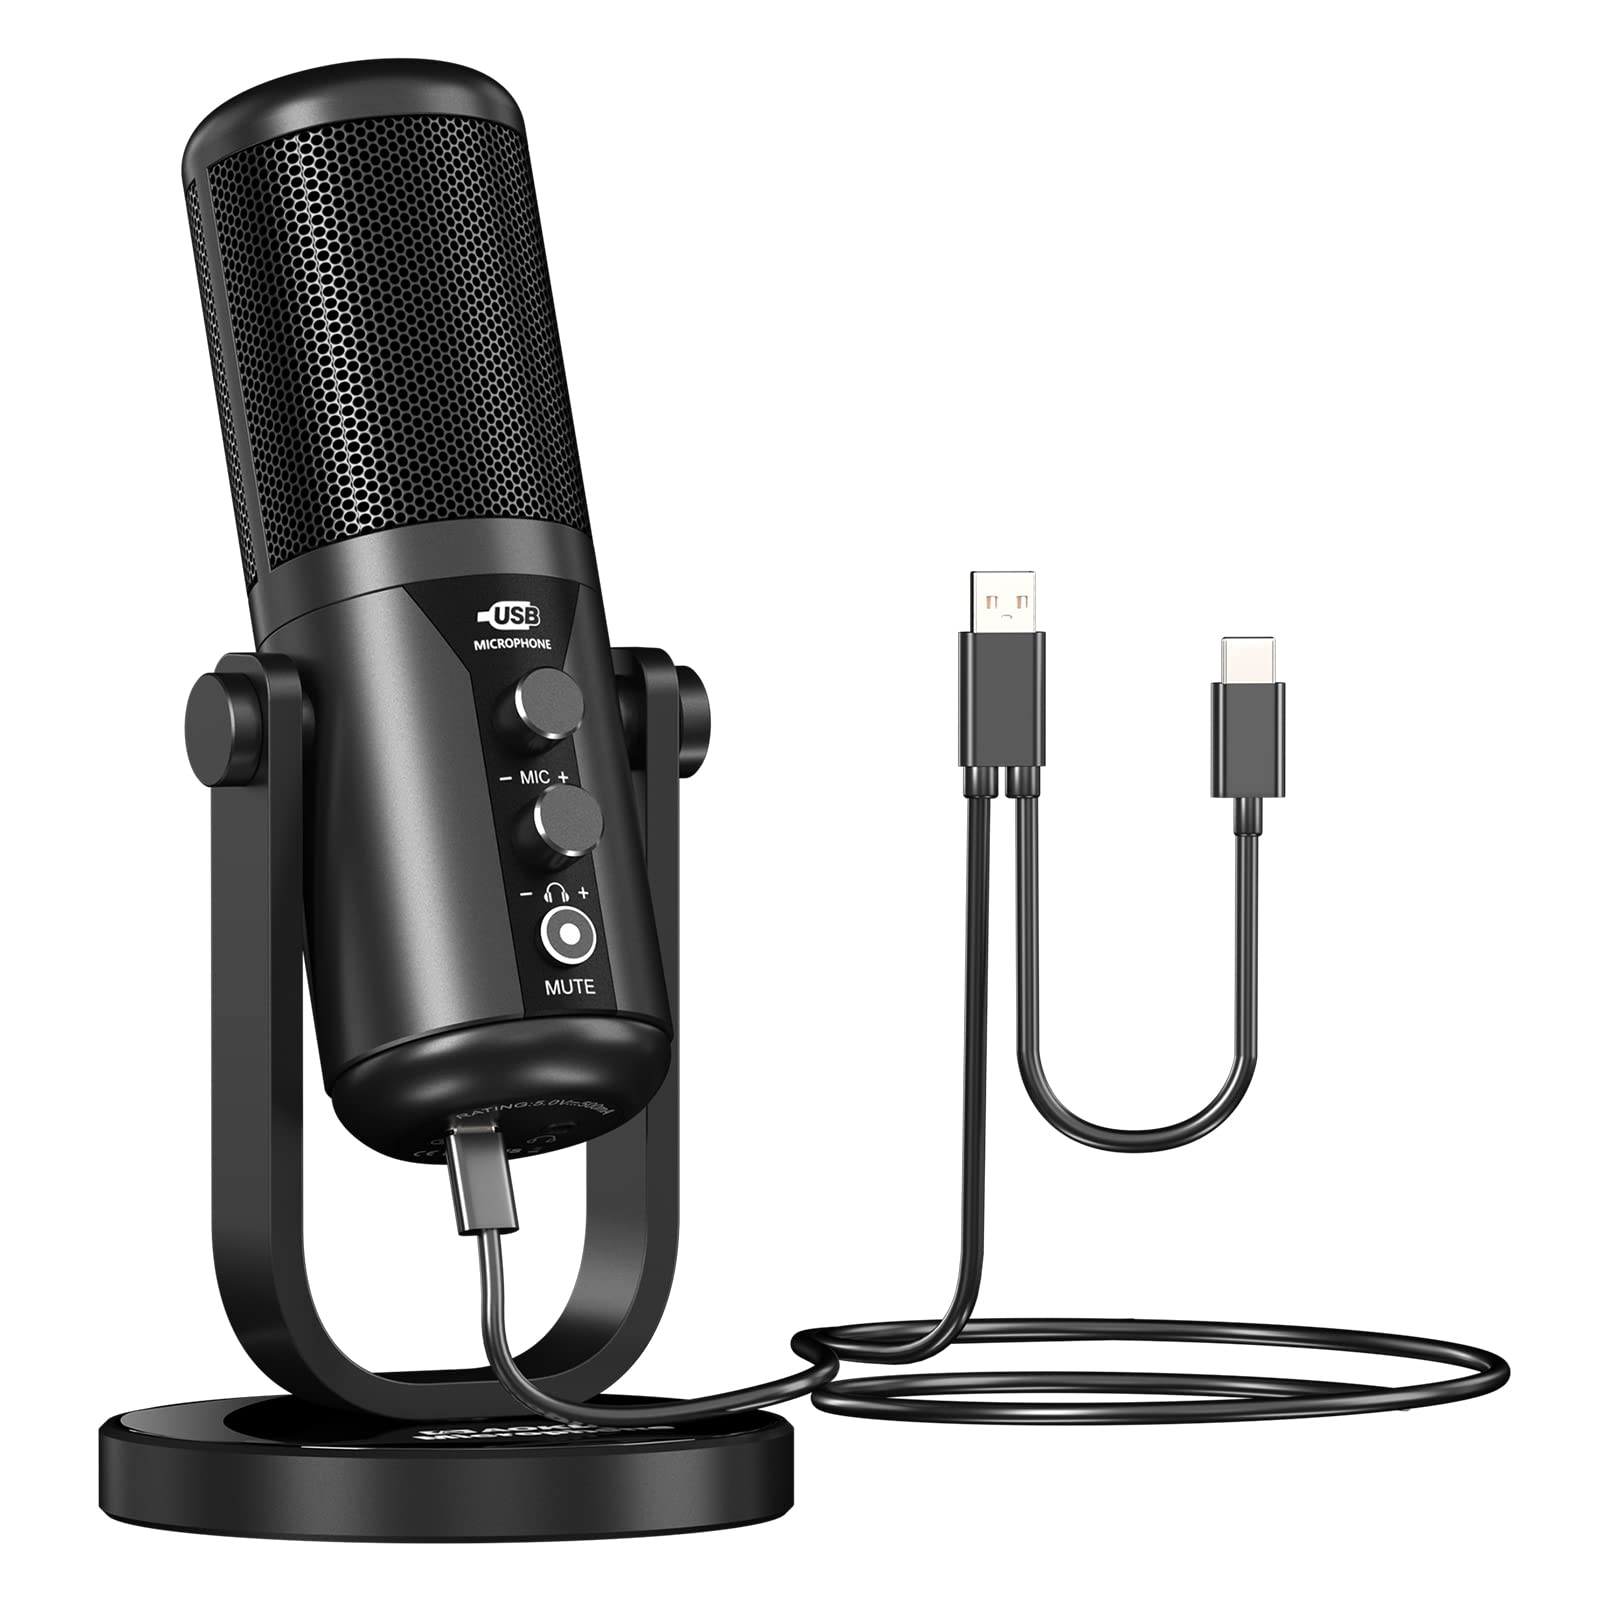 Aokeo USB Microphone, Condenser Podcast Microphone for Computer. Suitable for Recording, Gaming, Desktop, Windows, Mac, YouTube, Streaming, Discord